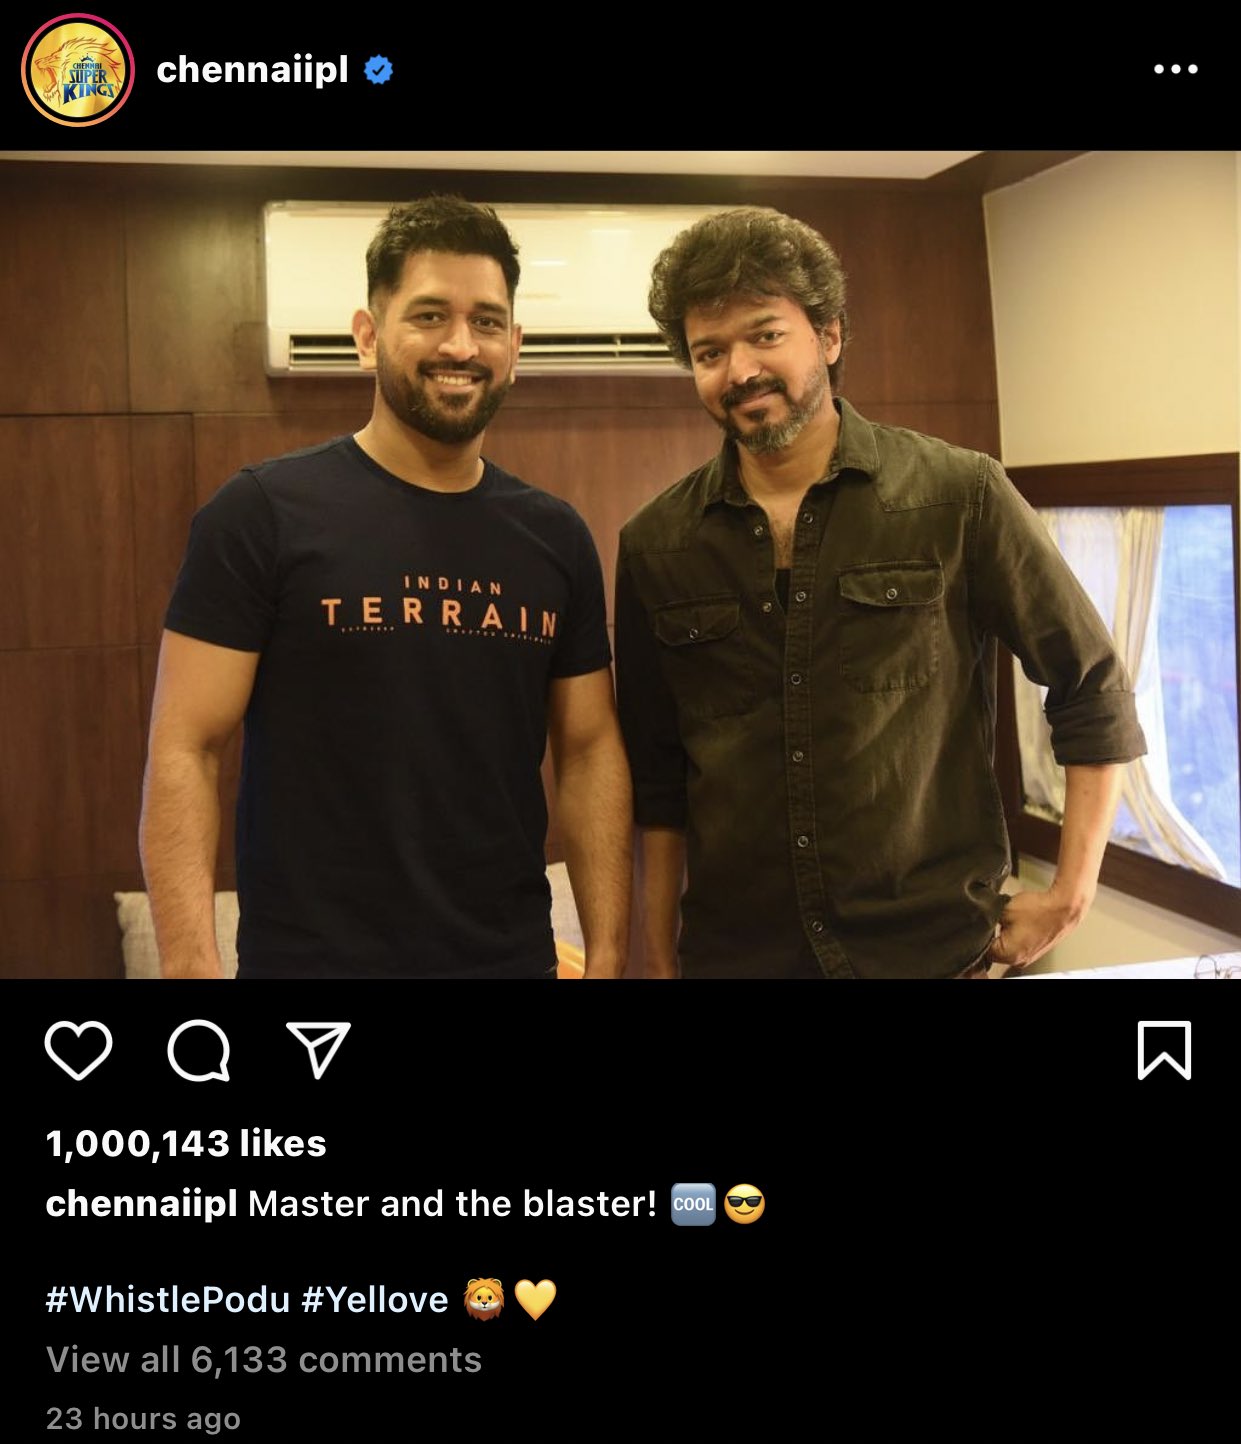 Thalapathy Vijay, Dhoni pic crossed 1 million likes in CSK Instagram